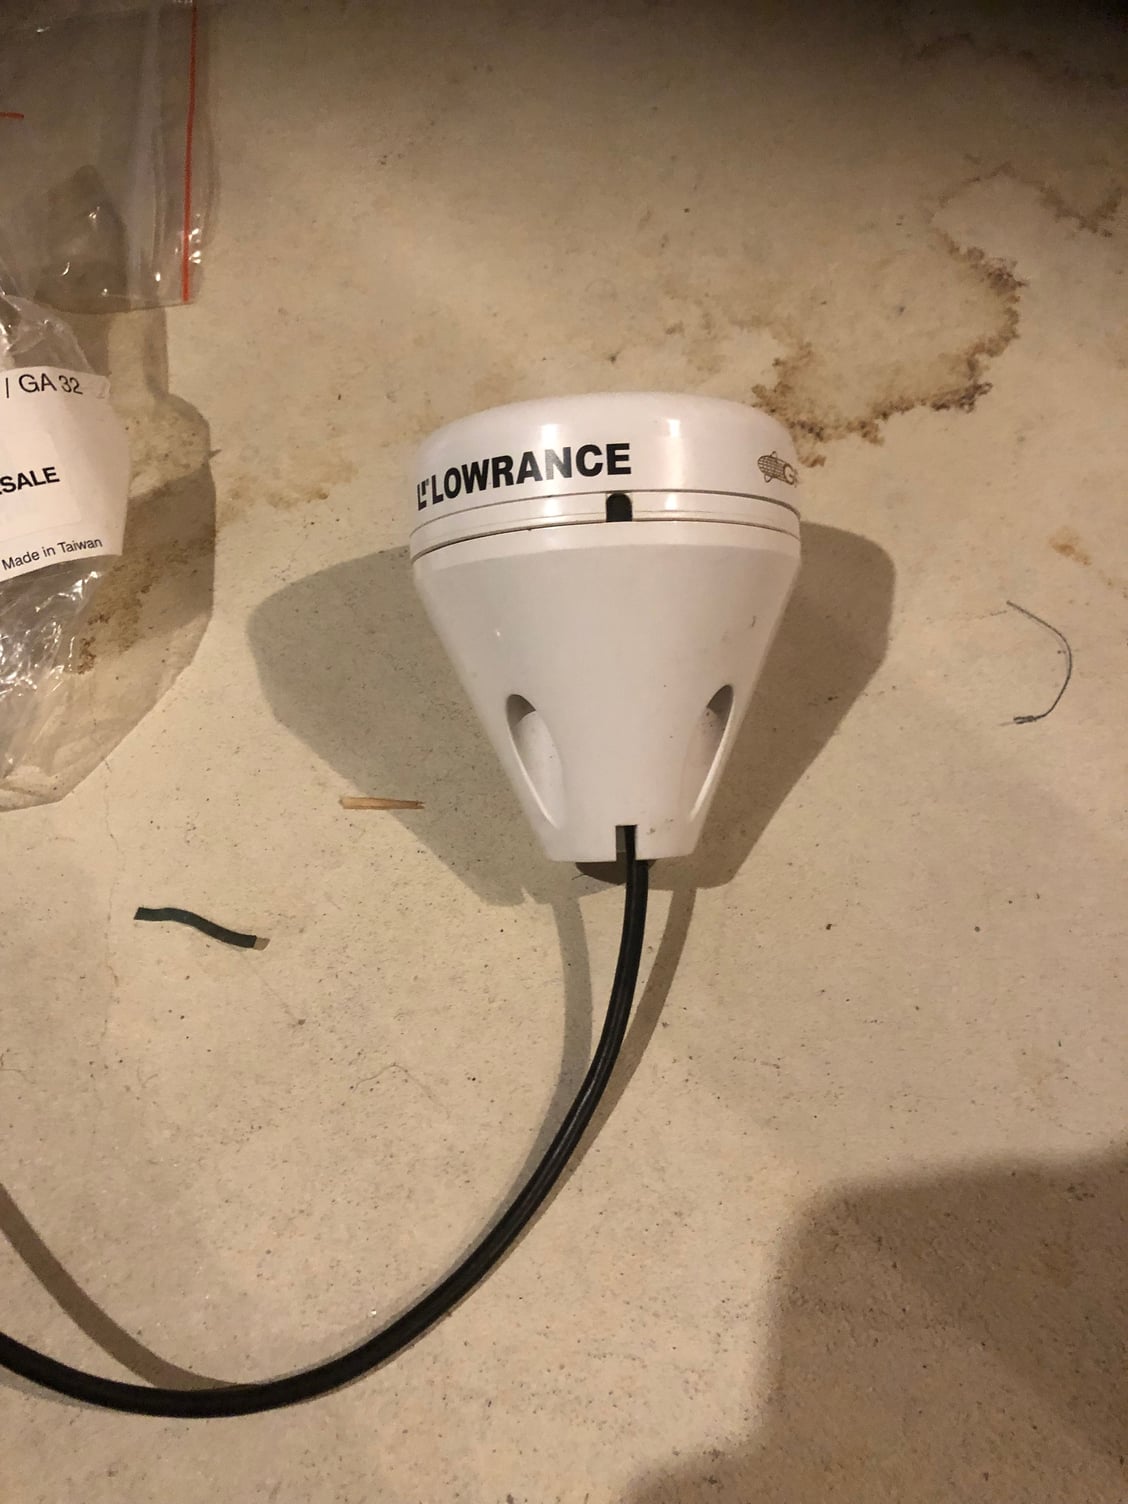 Lowrance LGC2000 GPS Antenna - The Hull Truth - Boating and Fishing Forum